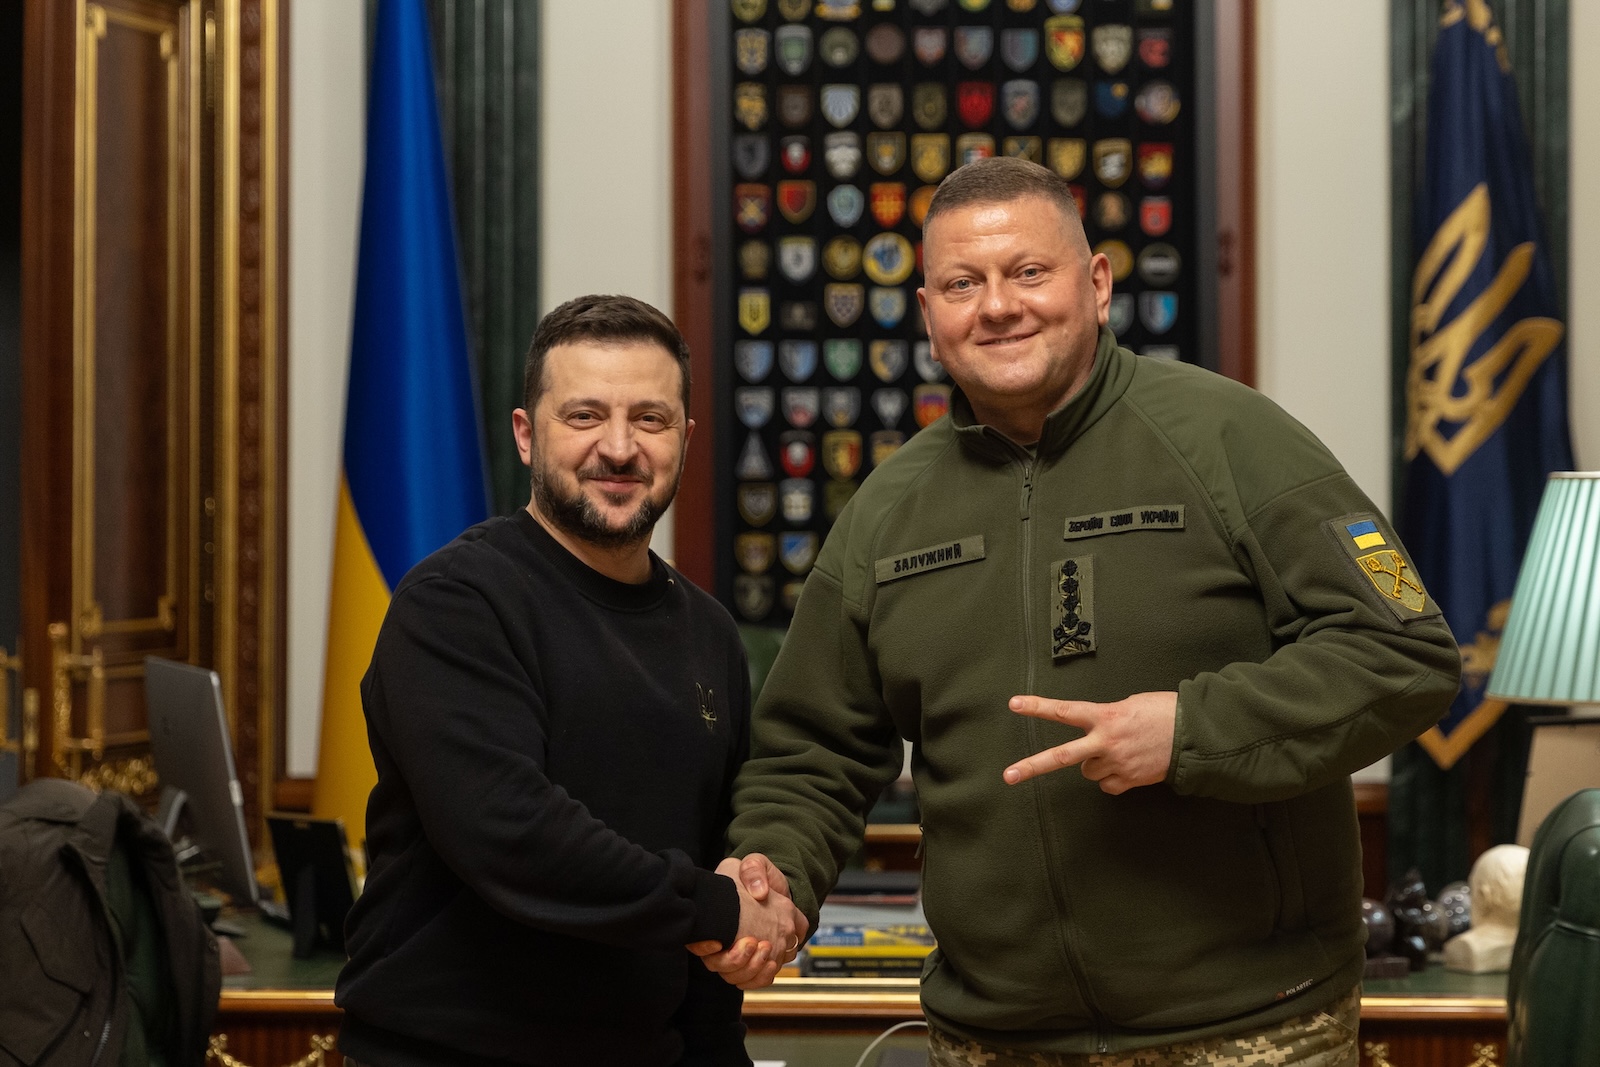 epa11137427 A handout photo made available by the Ukrainian Presidential Press Service on 08 February 2024 shows Ukraine's President Volodymyr Zelensky (L) shaking hands with Commander-in-Chief of the Armed Forces of Ukraine Valerii Zaluzhnyi during a meeting in Kyiv, Ukraine. On 08 February 2024, Ukraine's President Zelensky removed Commander-in-Chief of the Armed Forces of Ukraine Valerii Zaluzhnyi from his post. 'Today, I made the decision to renew the leadership of the Armed Forces of Ukraine', Zelensky said, adding 'I am grateful to General Zaluzhnyi for two years of defense'. Oleksandr Syrskyi, commander of the Ukrainian Ground Forces, has been appointed as new Commander-in-Chief of the country's Armed Forces.  EPA/UKRAINIAN PRESIDENTIAL PRESS SERVICE HANDOUT -- MANDATORY CREDIT: UKRAINIAN PRESIDENTIAL PRESS SERVICE --  HANDOUT EDITORIAL USE ONLY/NO SALES HANDOUT EDITORIAL USE ONLY/NO SALES